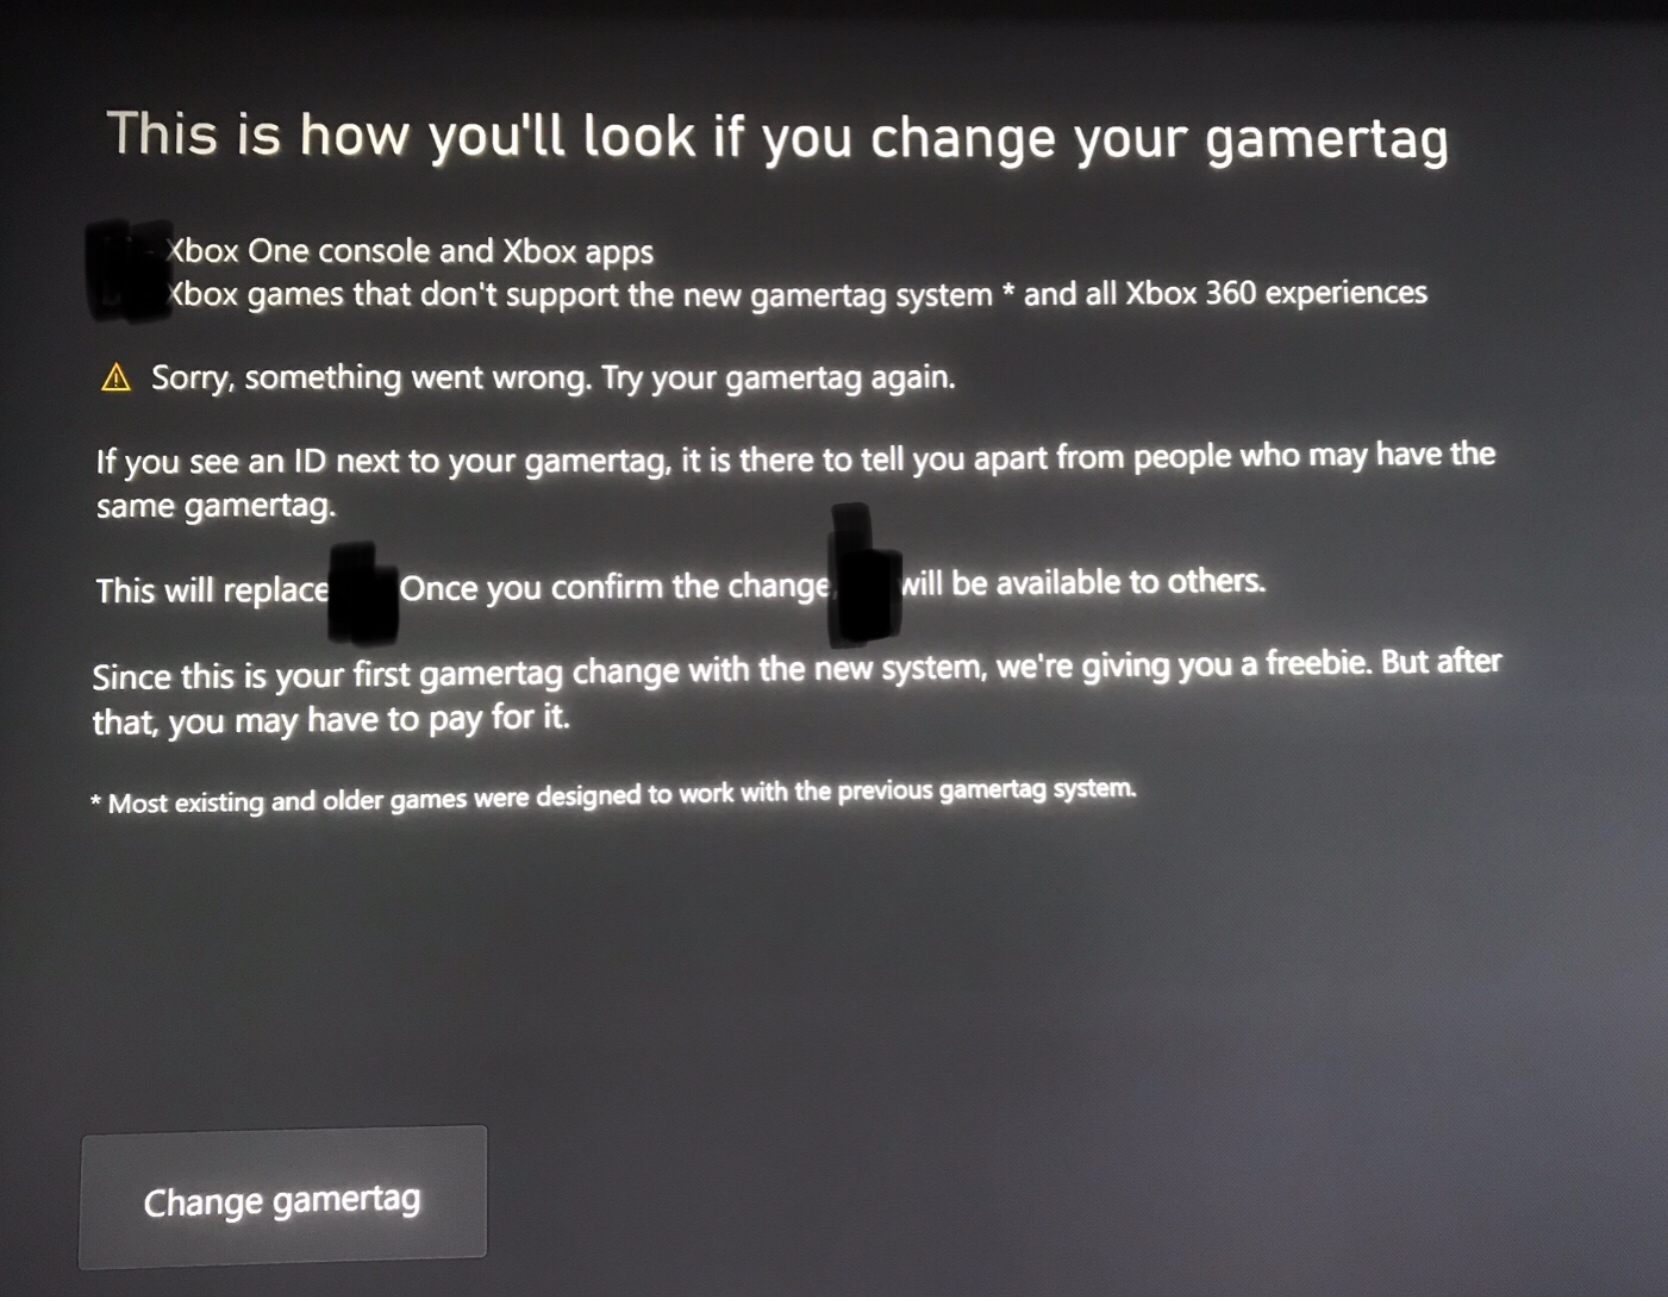 Can you help me understand this Gamertag Change process? The new